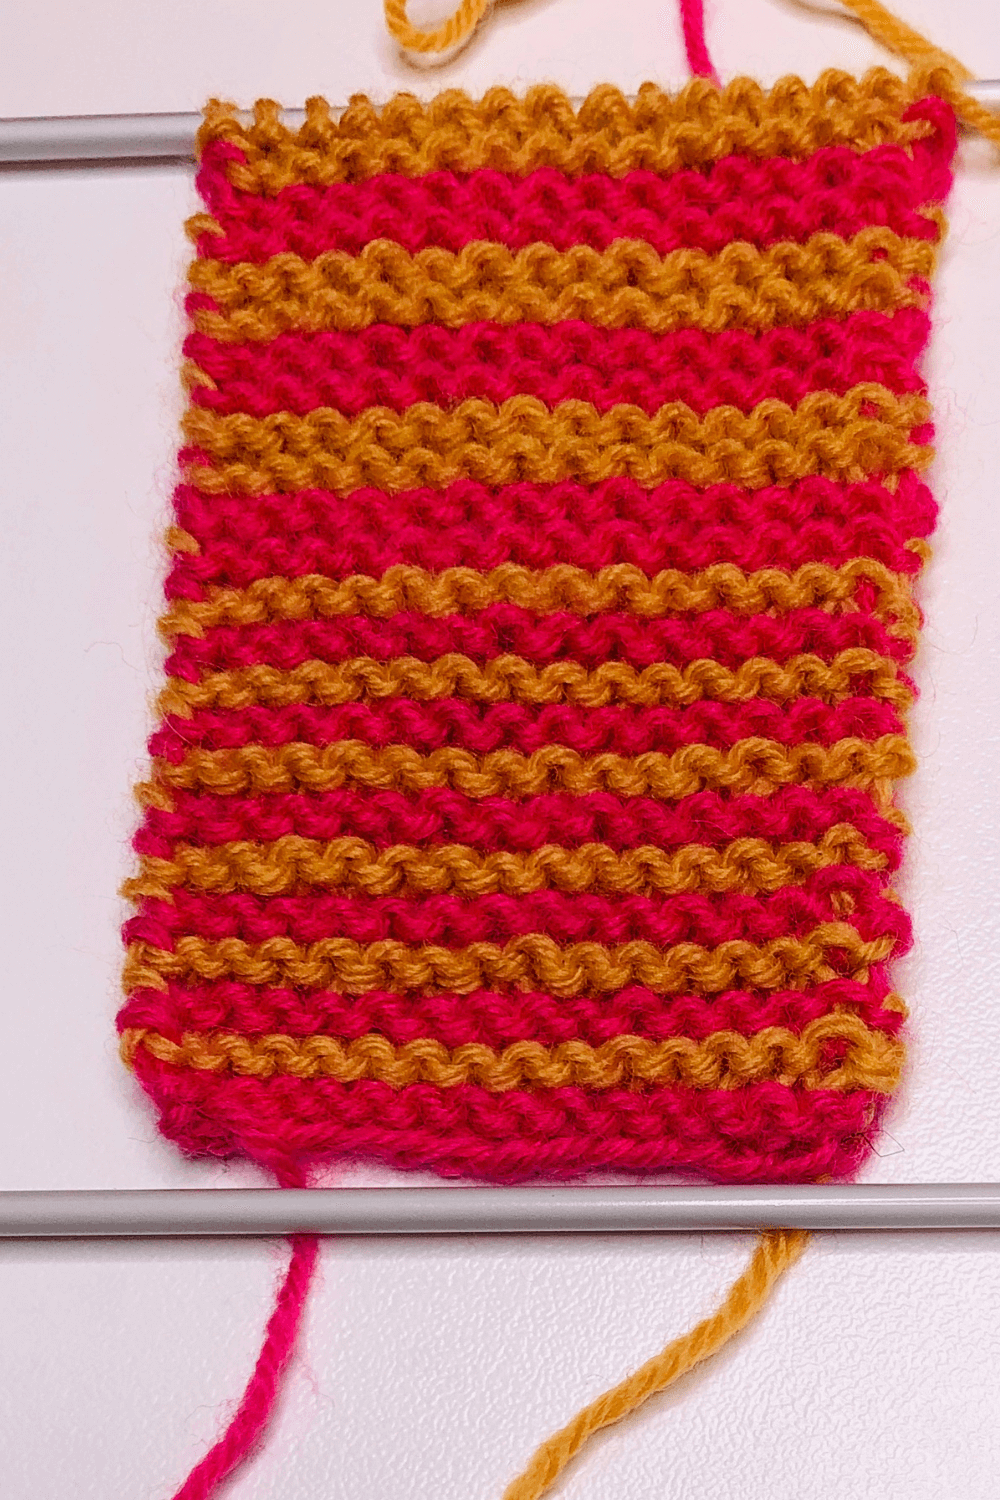 An example of how garter stitch stripes can look when you have control over the purl dash lines.